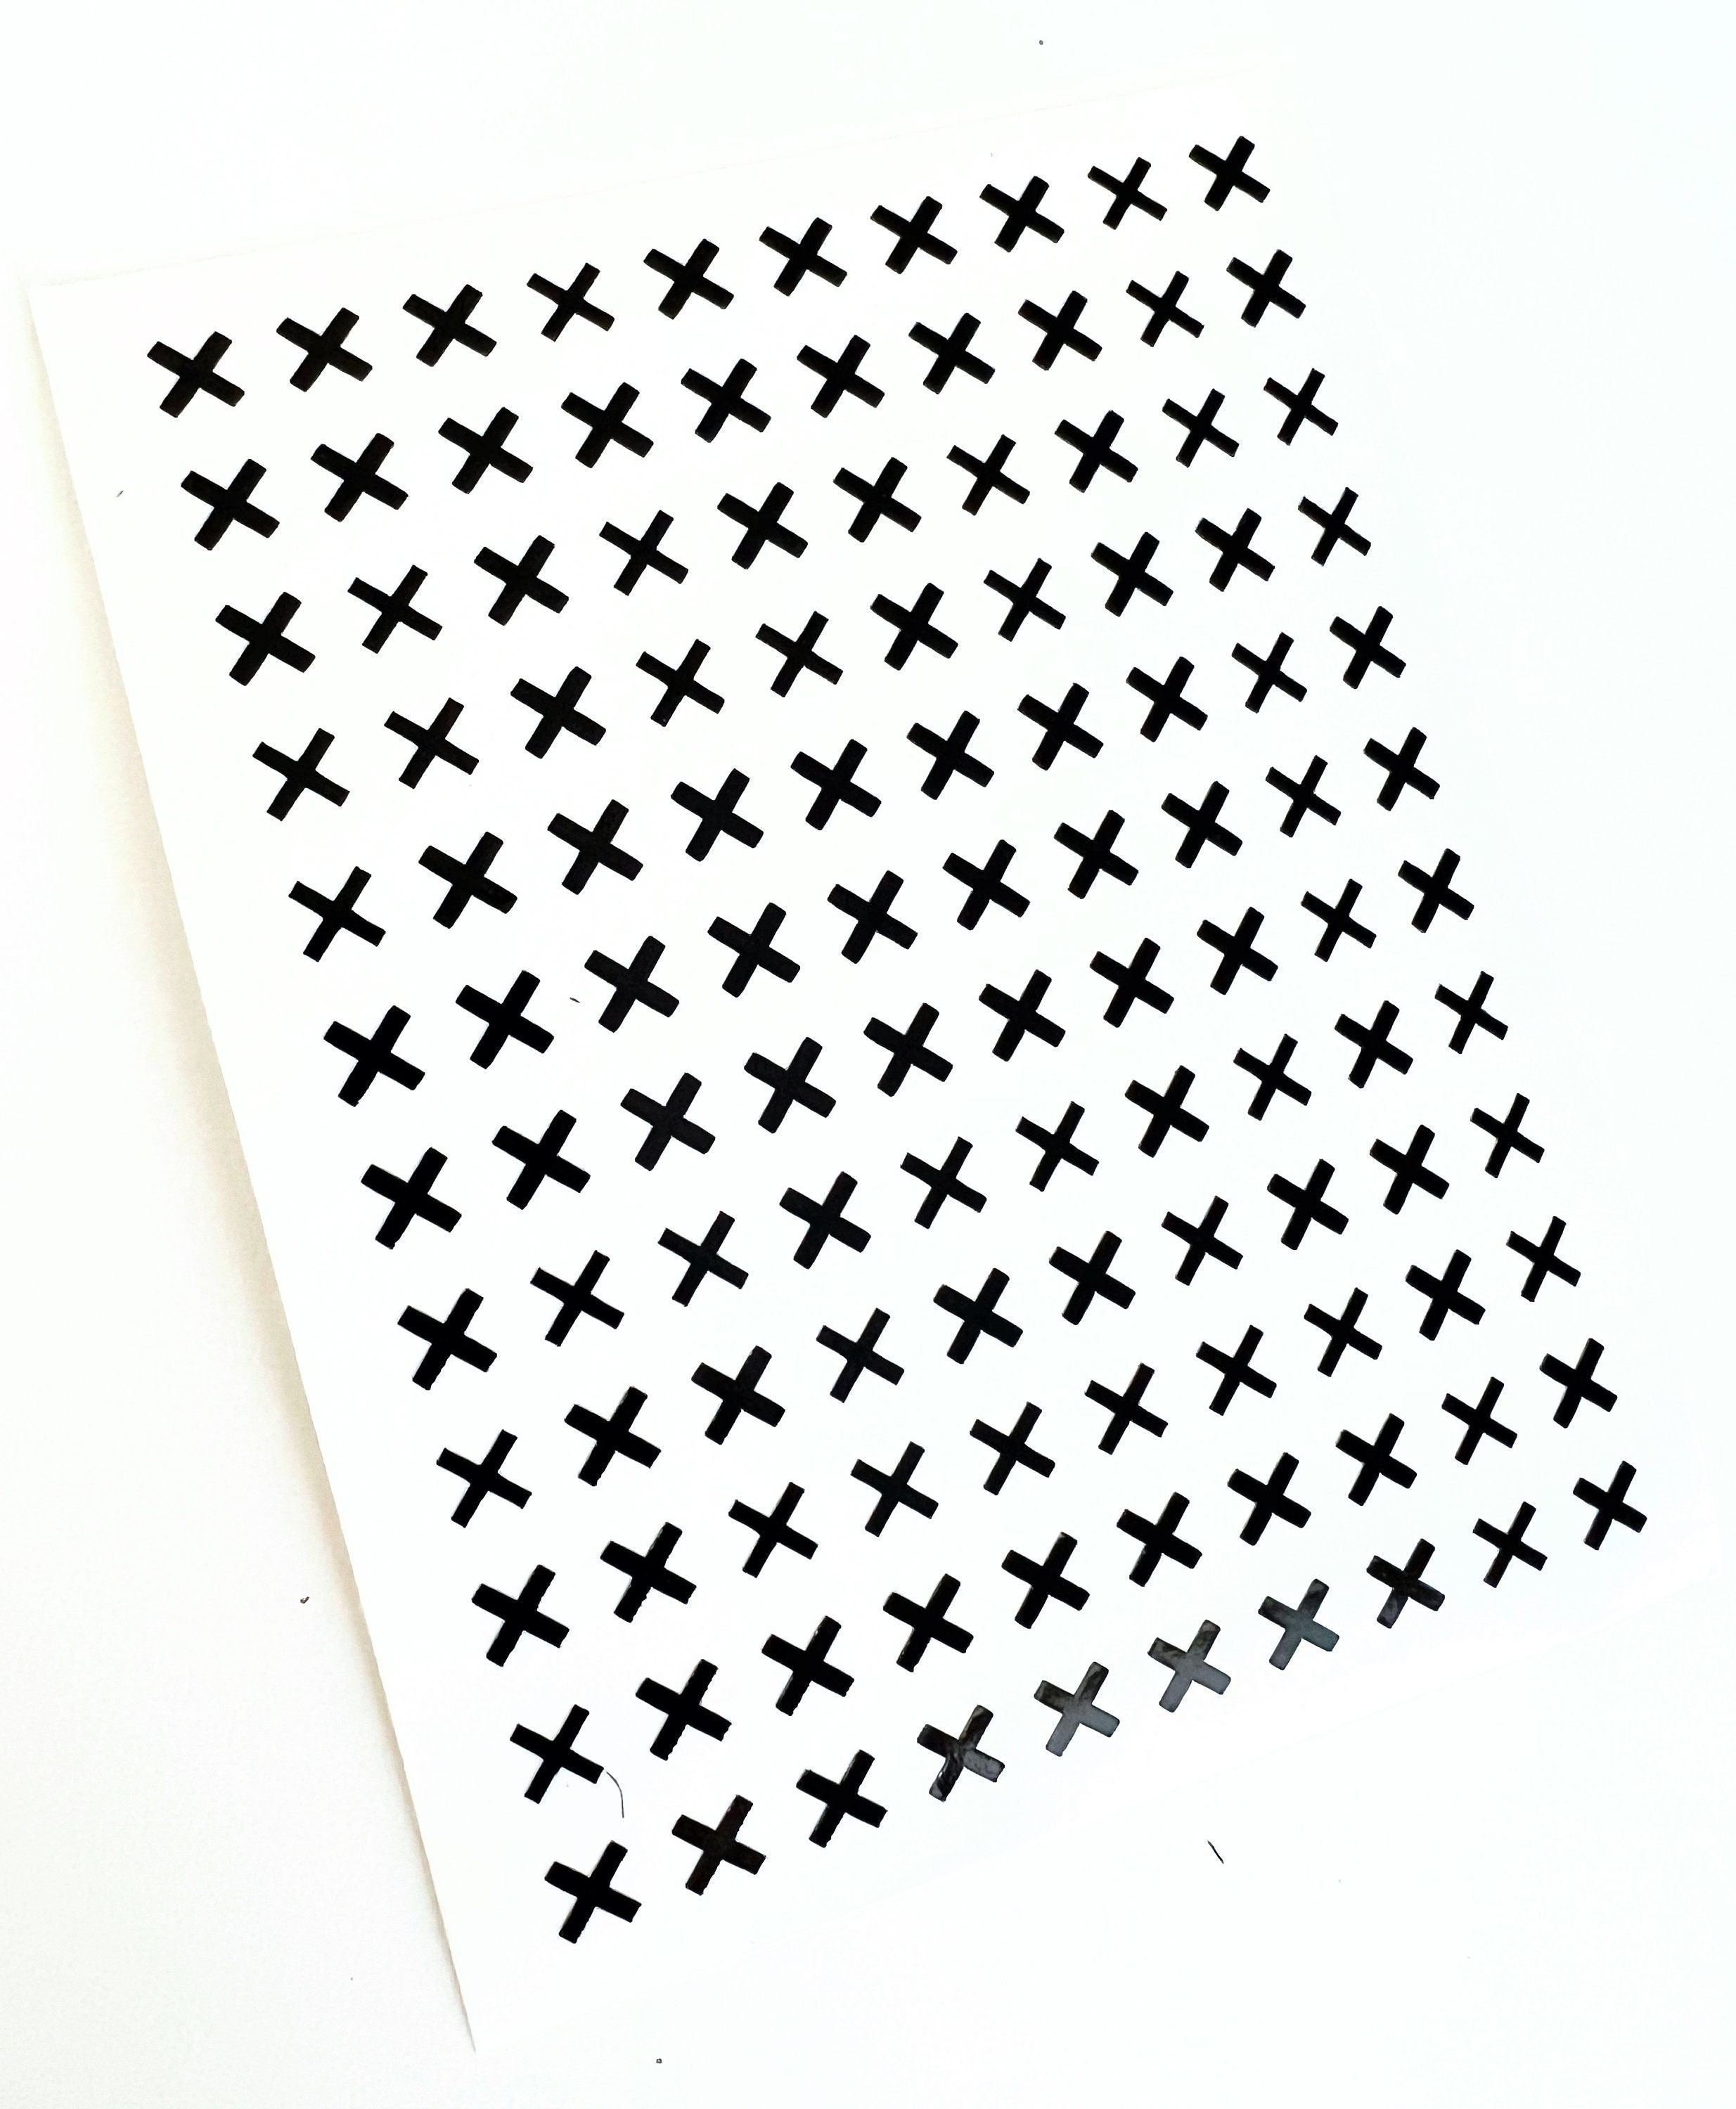 1/2 Inch Mini Star Sticker Sheet 13mm Small Star Stickers Tiny Star Holo  Stickers Holographic Planner Calendar 